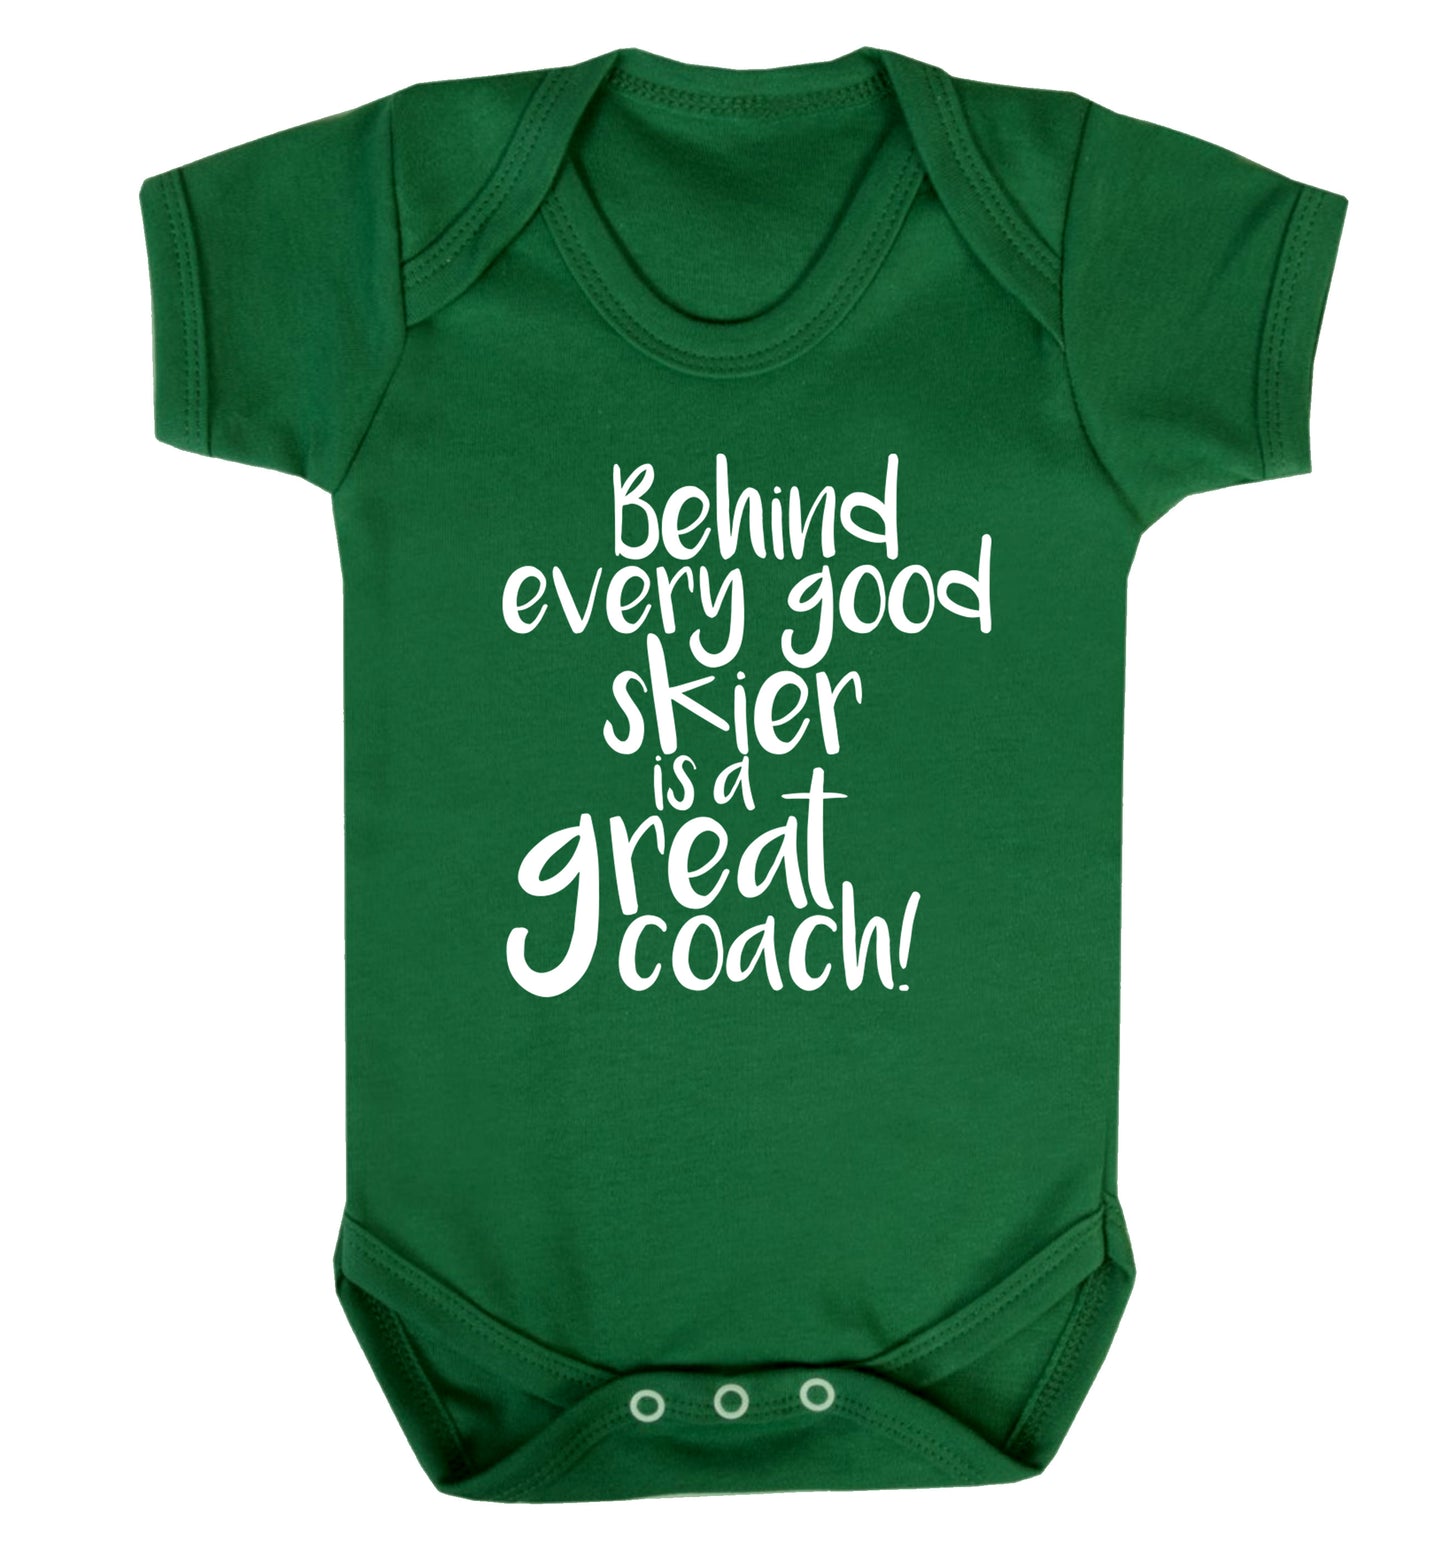 Behind every good skier is a great coach! Baby Vest green 18-24 months